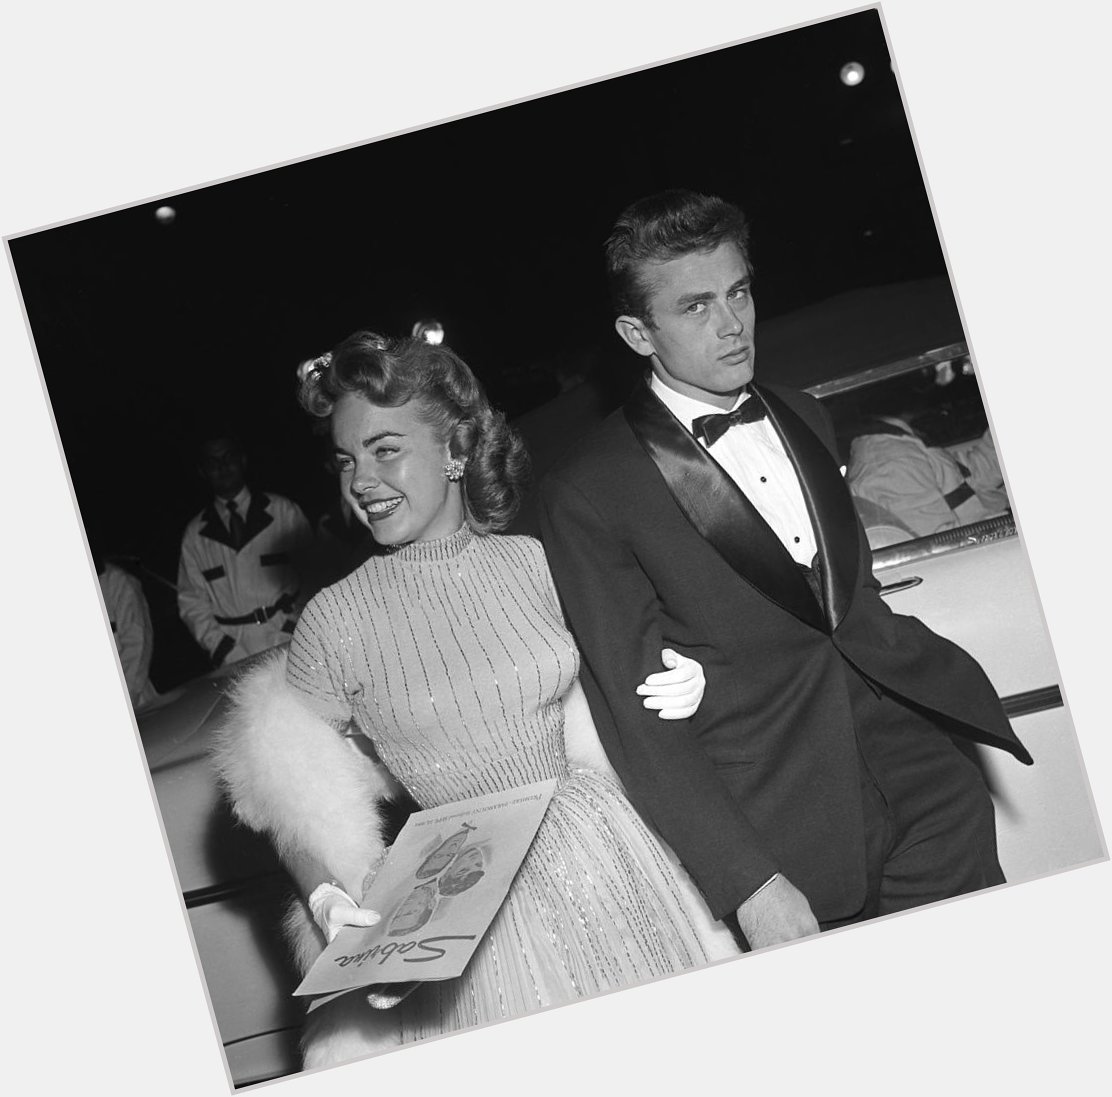 Terry Moore and James Dean at the premiere of Sabrina (1954)

Happy 92nd birthday to Terry! 